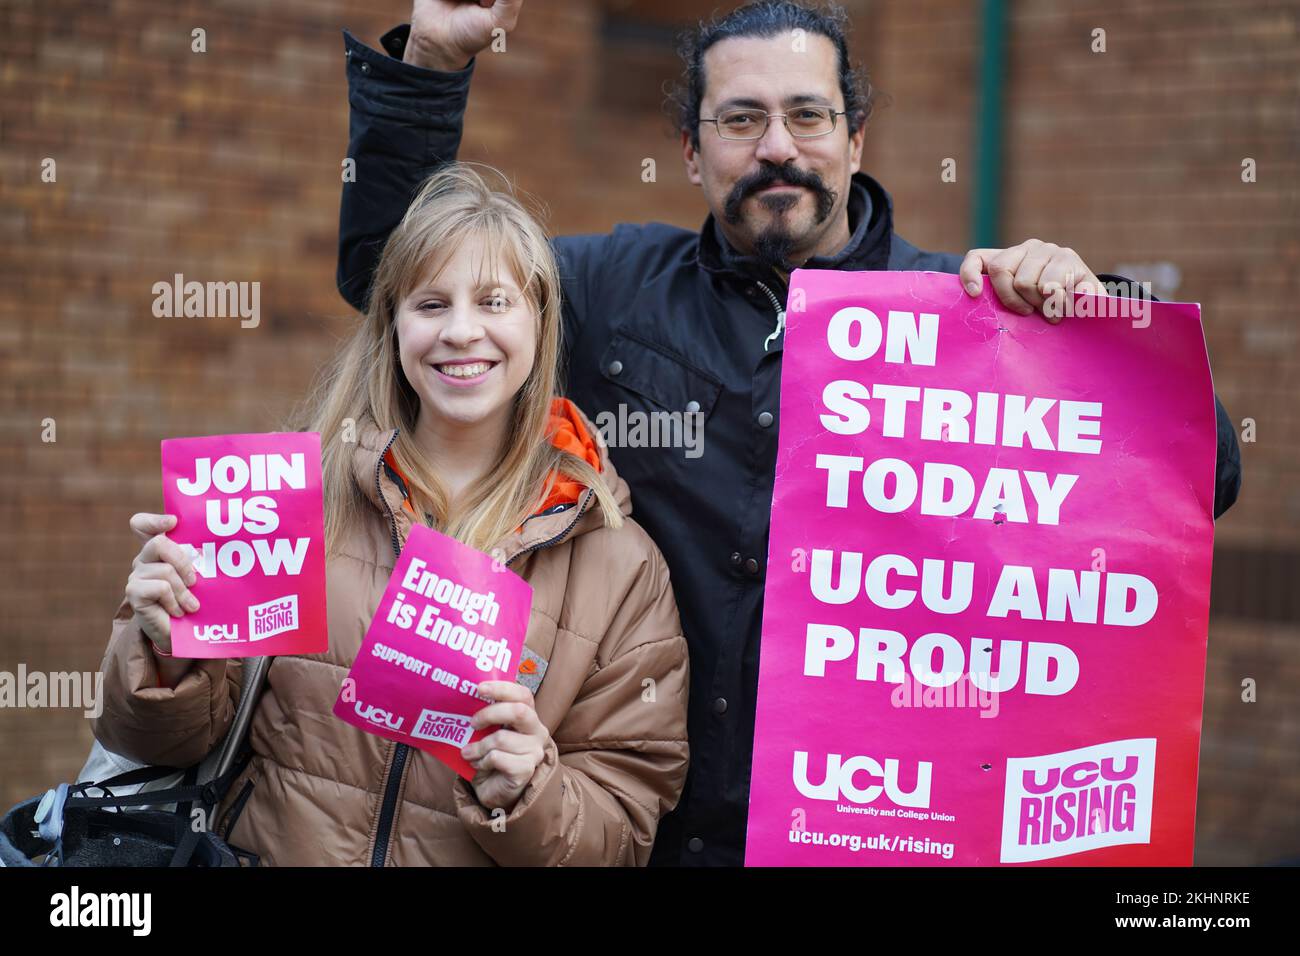 Cardiff University, Wales, UK. 24th Nov, 2022. Staff from the University and College Union (UCU) taking part in the UCU strike at Cardiff Univerity on the picket line, 24th November 2022, credit Penallta Photographics/Alamy live Credit: Penallta Photographics/Alamy Live News Stock Photo